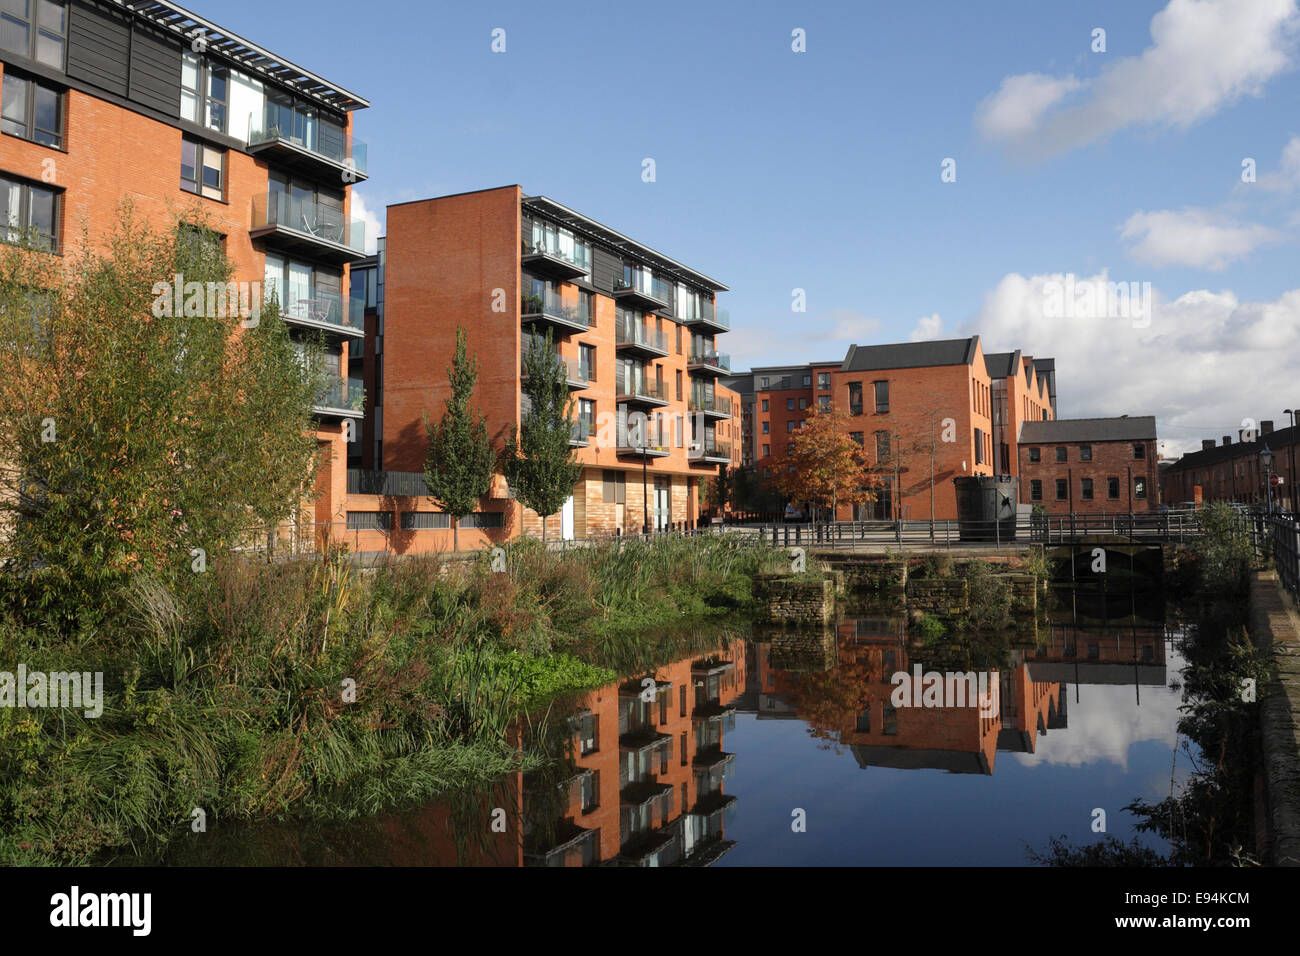 Kelham Island Apartments in Sheffield England, Mill Run in foreground, urban inner city apartments redevelopment Stock Photo